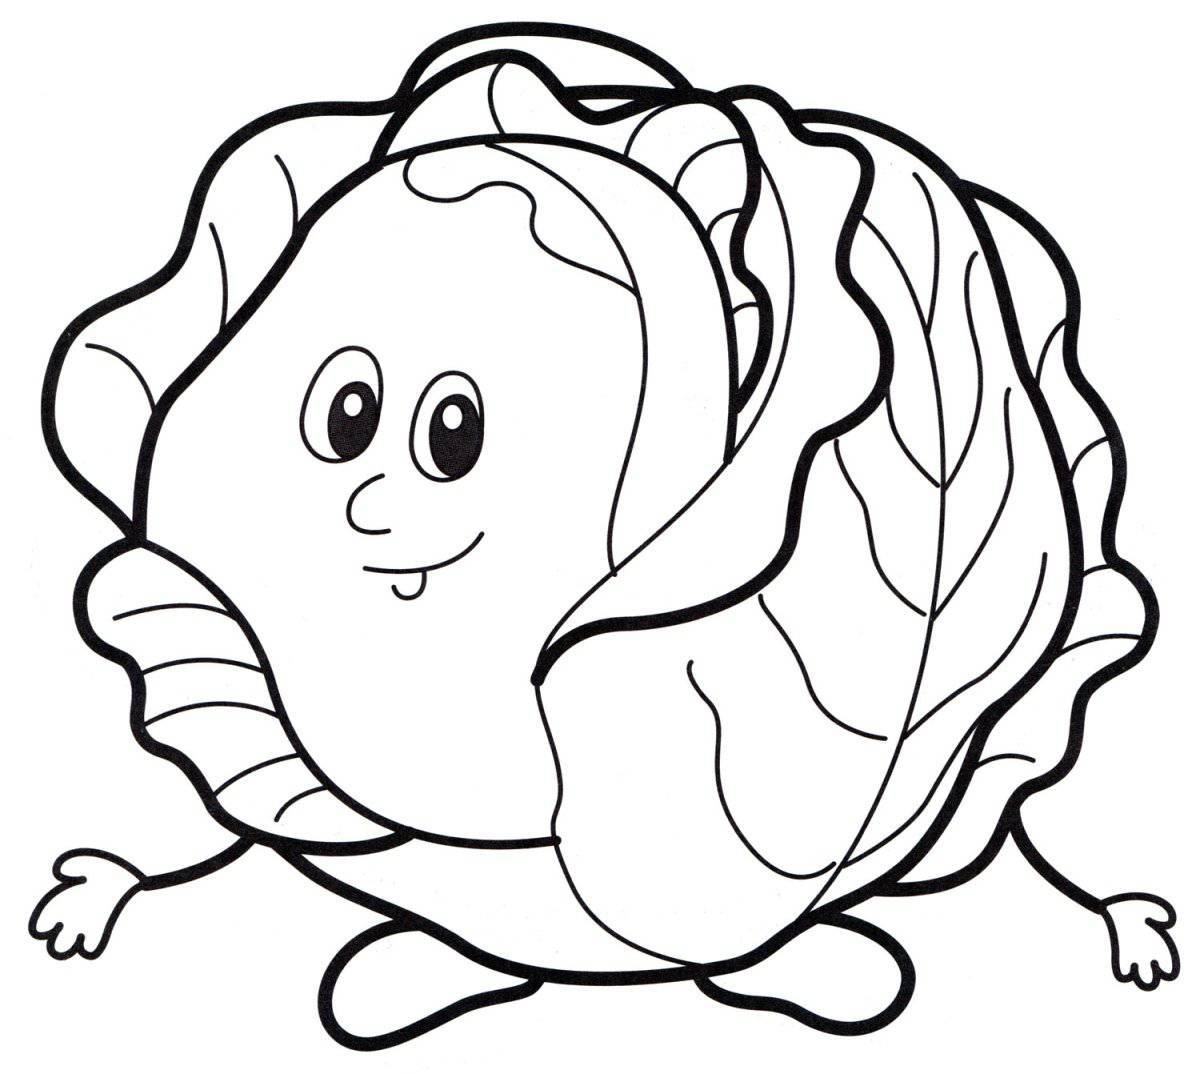 A fun cabbage coloring book for kids